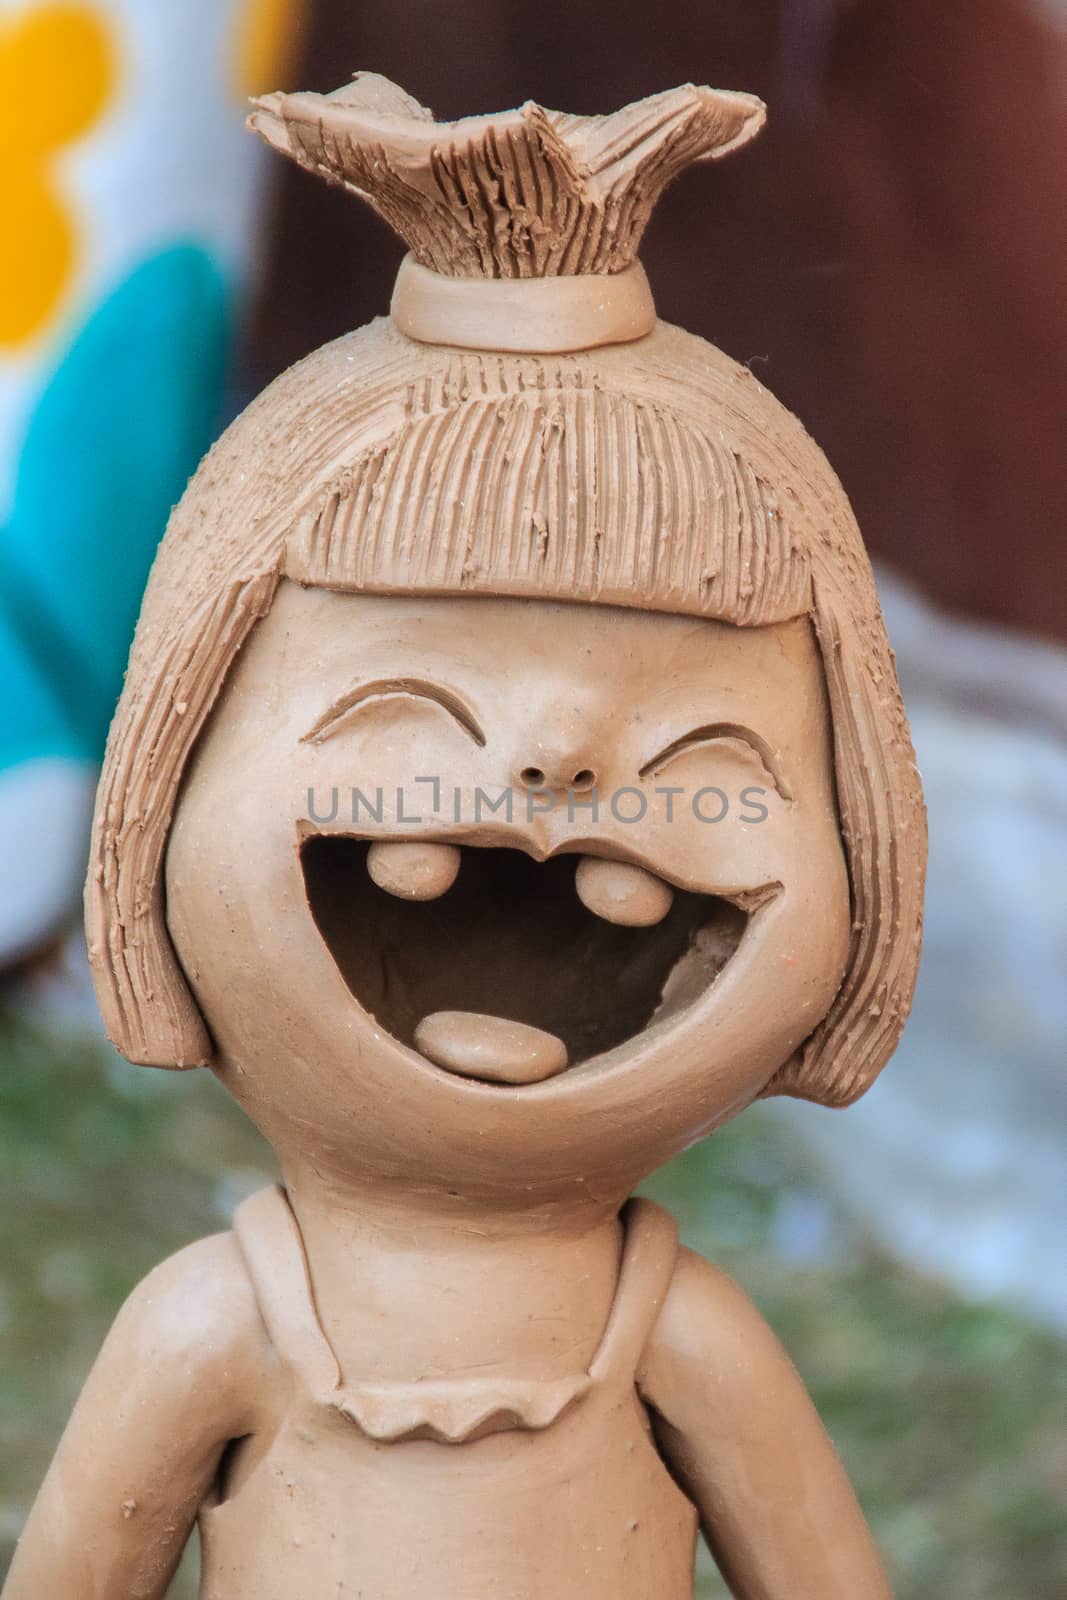 Happy Ceramic dolls for garden decoration. Cute ceramic clay pottery of girl show her up-swept bun and broken tooth that happy laughing until her eyes closed. Happy dolls for garden decoration.